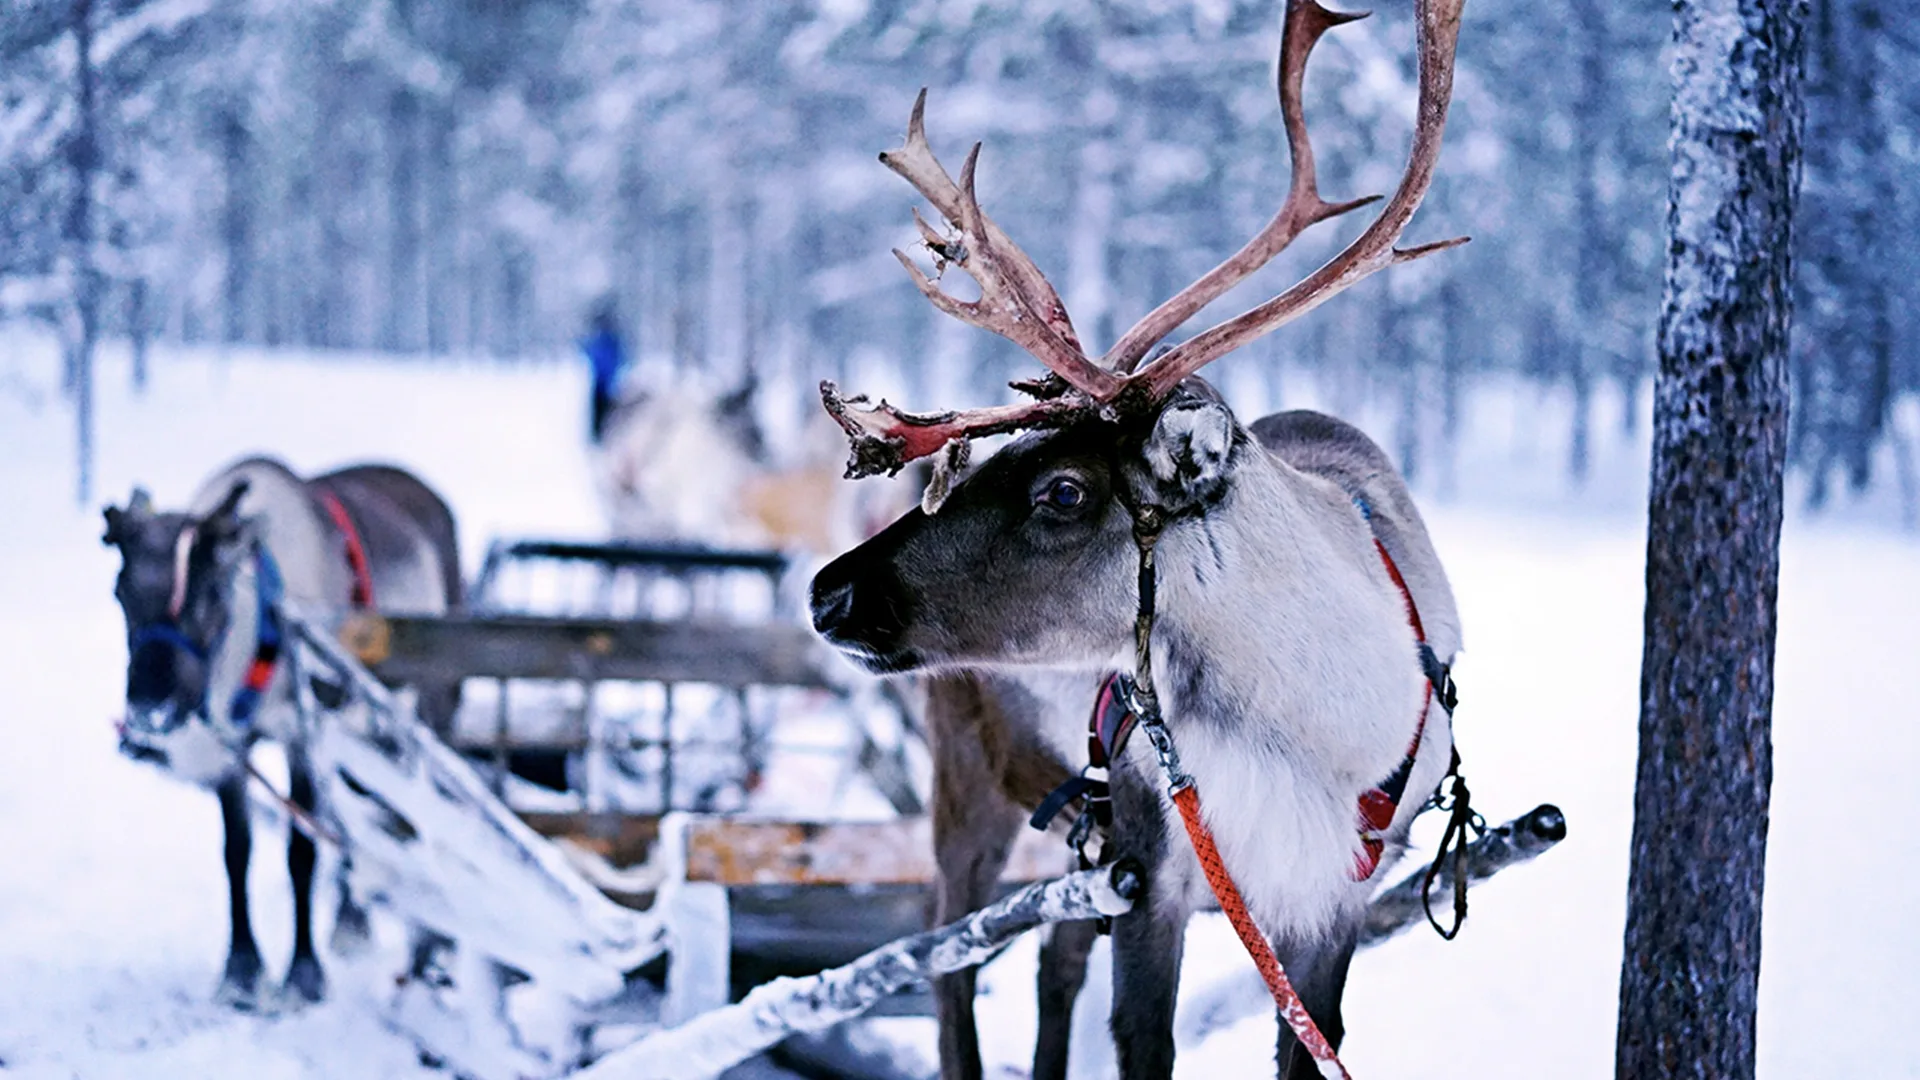 Reindeer attatched to a Christmas sleigh